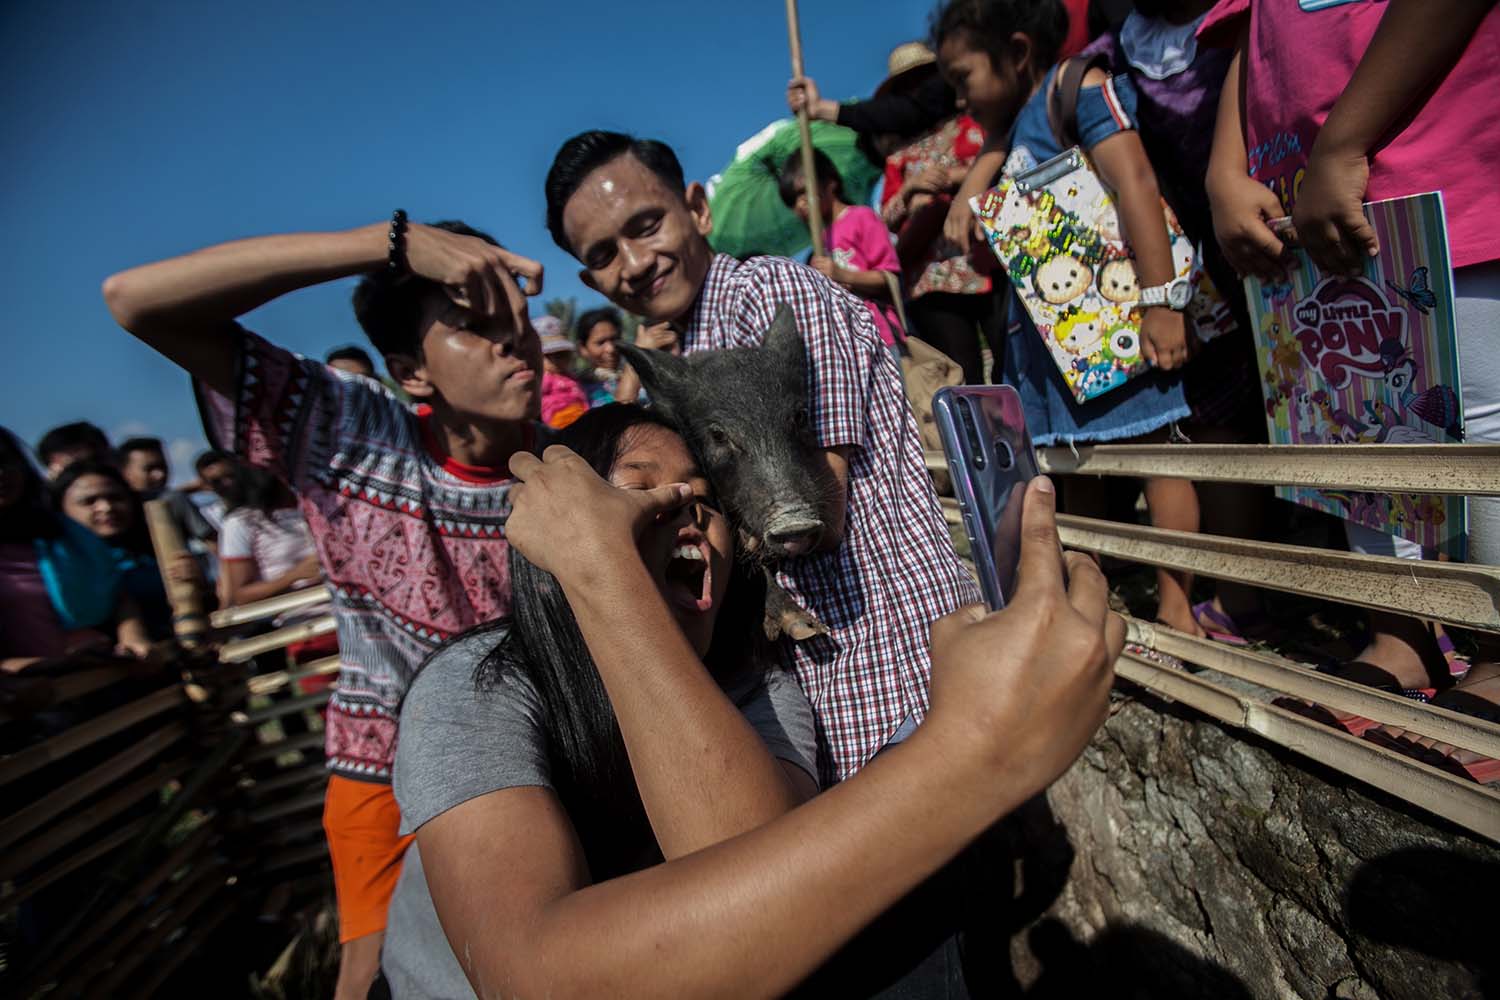 Smile together: Contestants take selfies with pigs during the Lake Toba Pig and Pork Festival 2019. JP/Andri Ginting